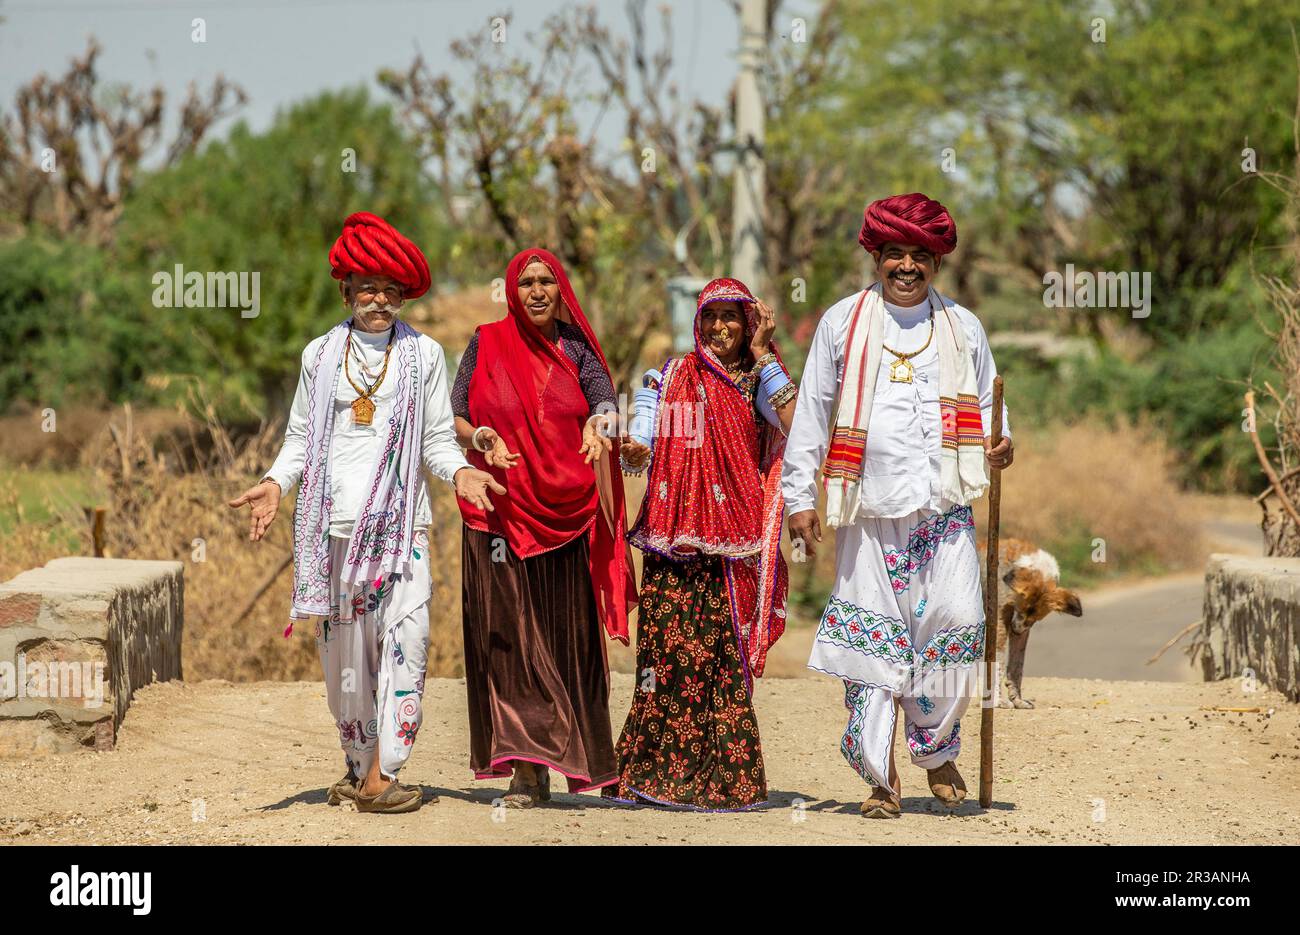 Men and women of the Rabari ethnic group in national dress are walking along the road. Stock Photo